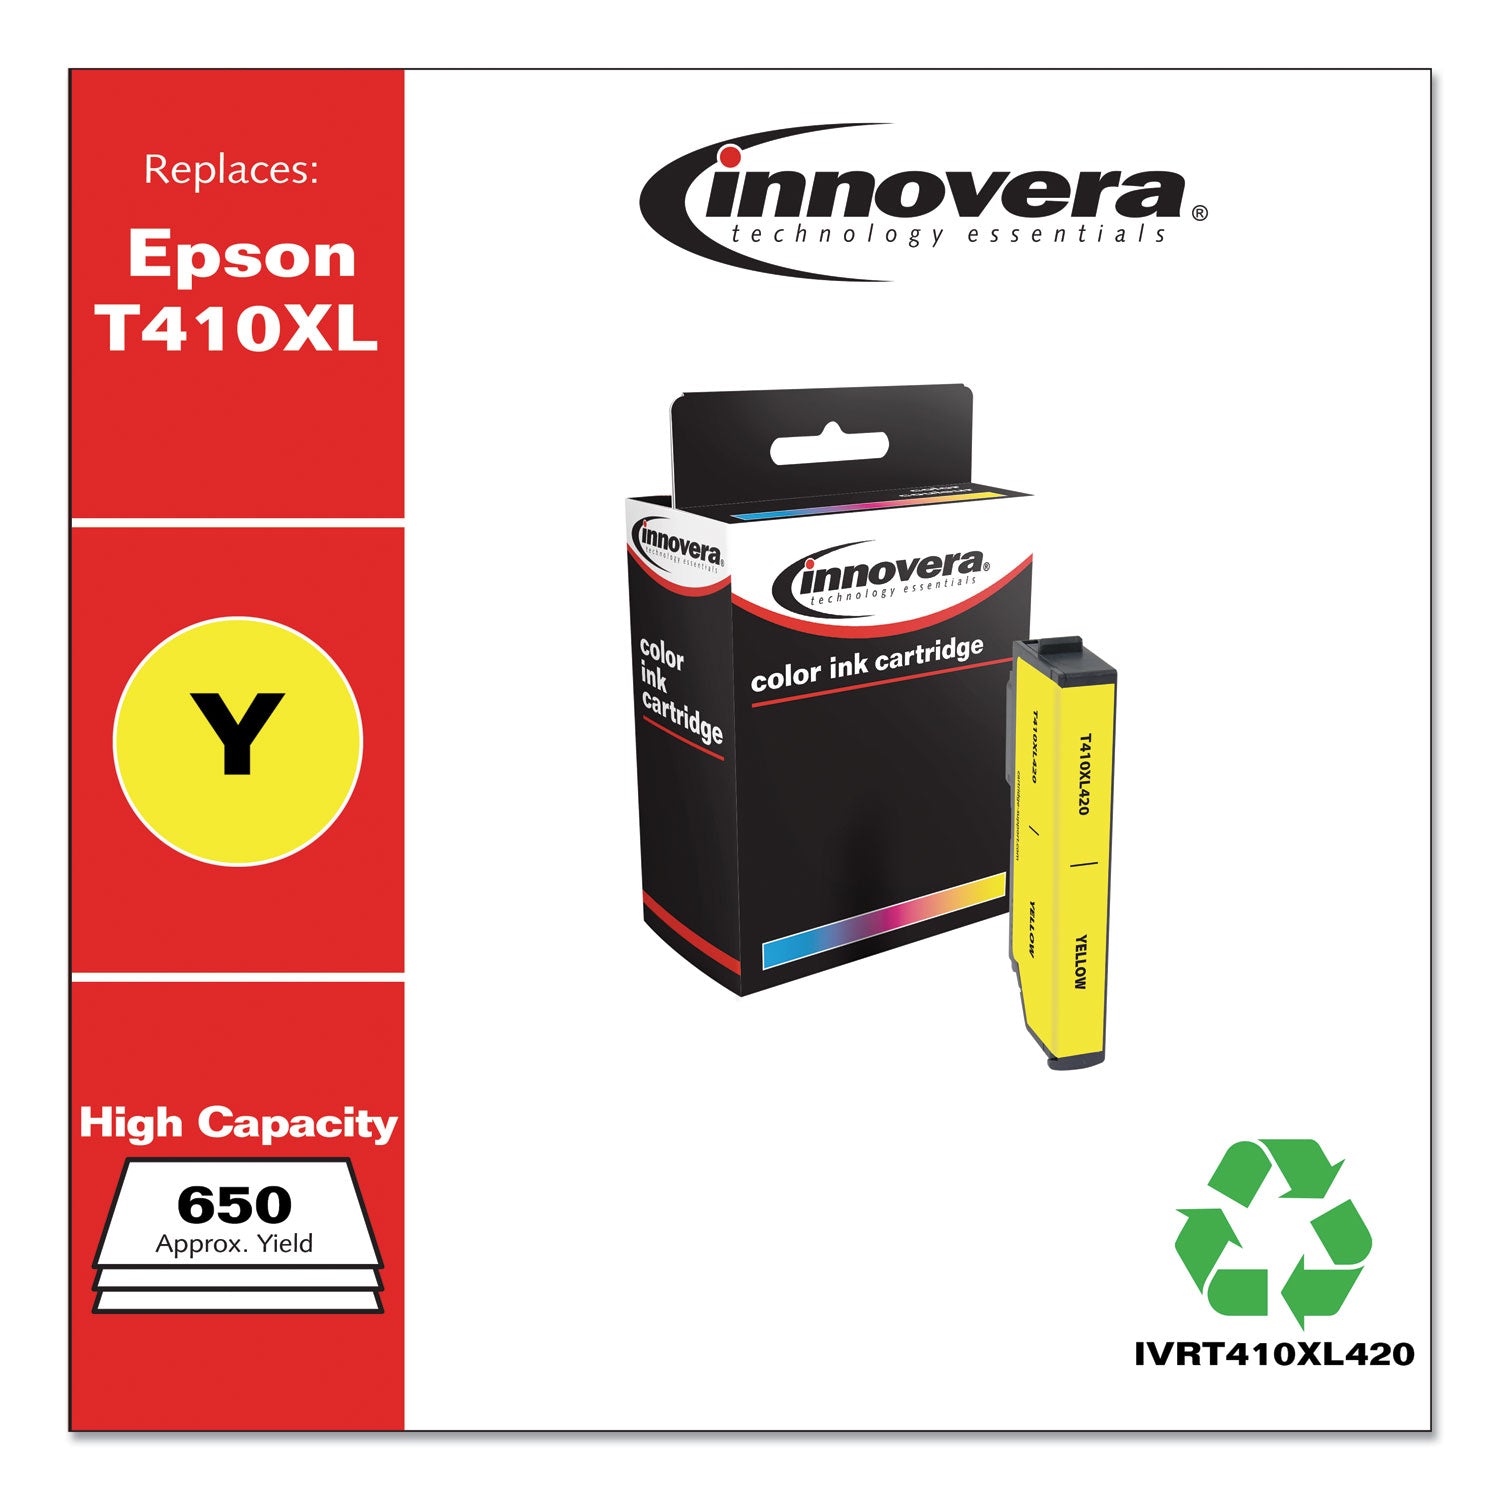 remanufactured-yellow-high-yield-ink-replacement-for-t410xl-t410xl420-650-page-yield_ivrt410xl420 - 2